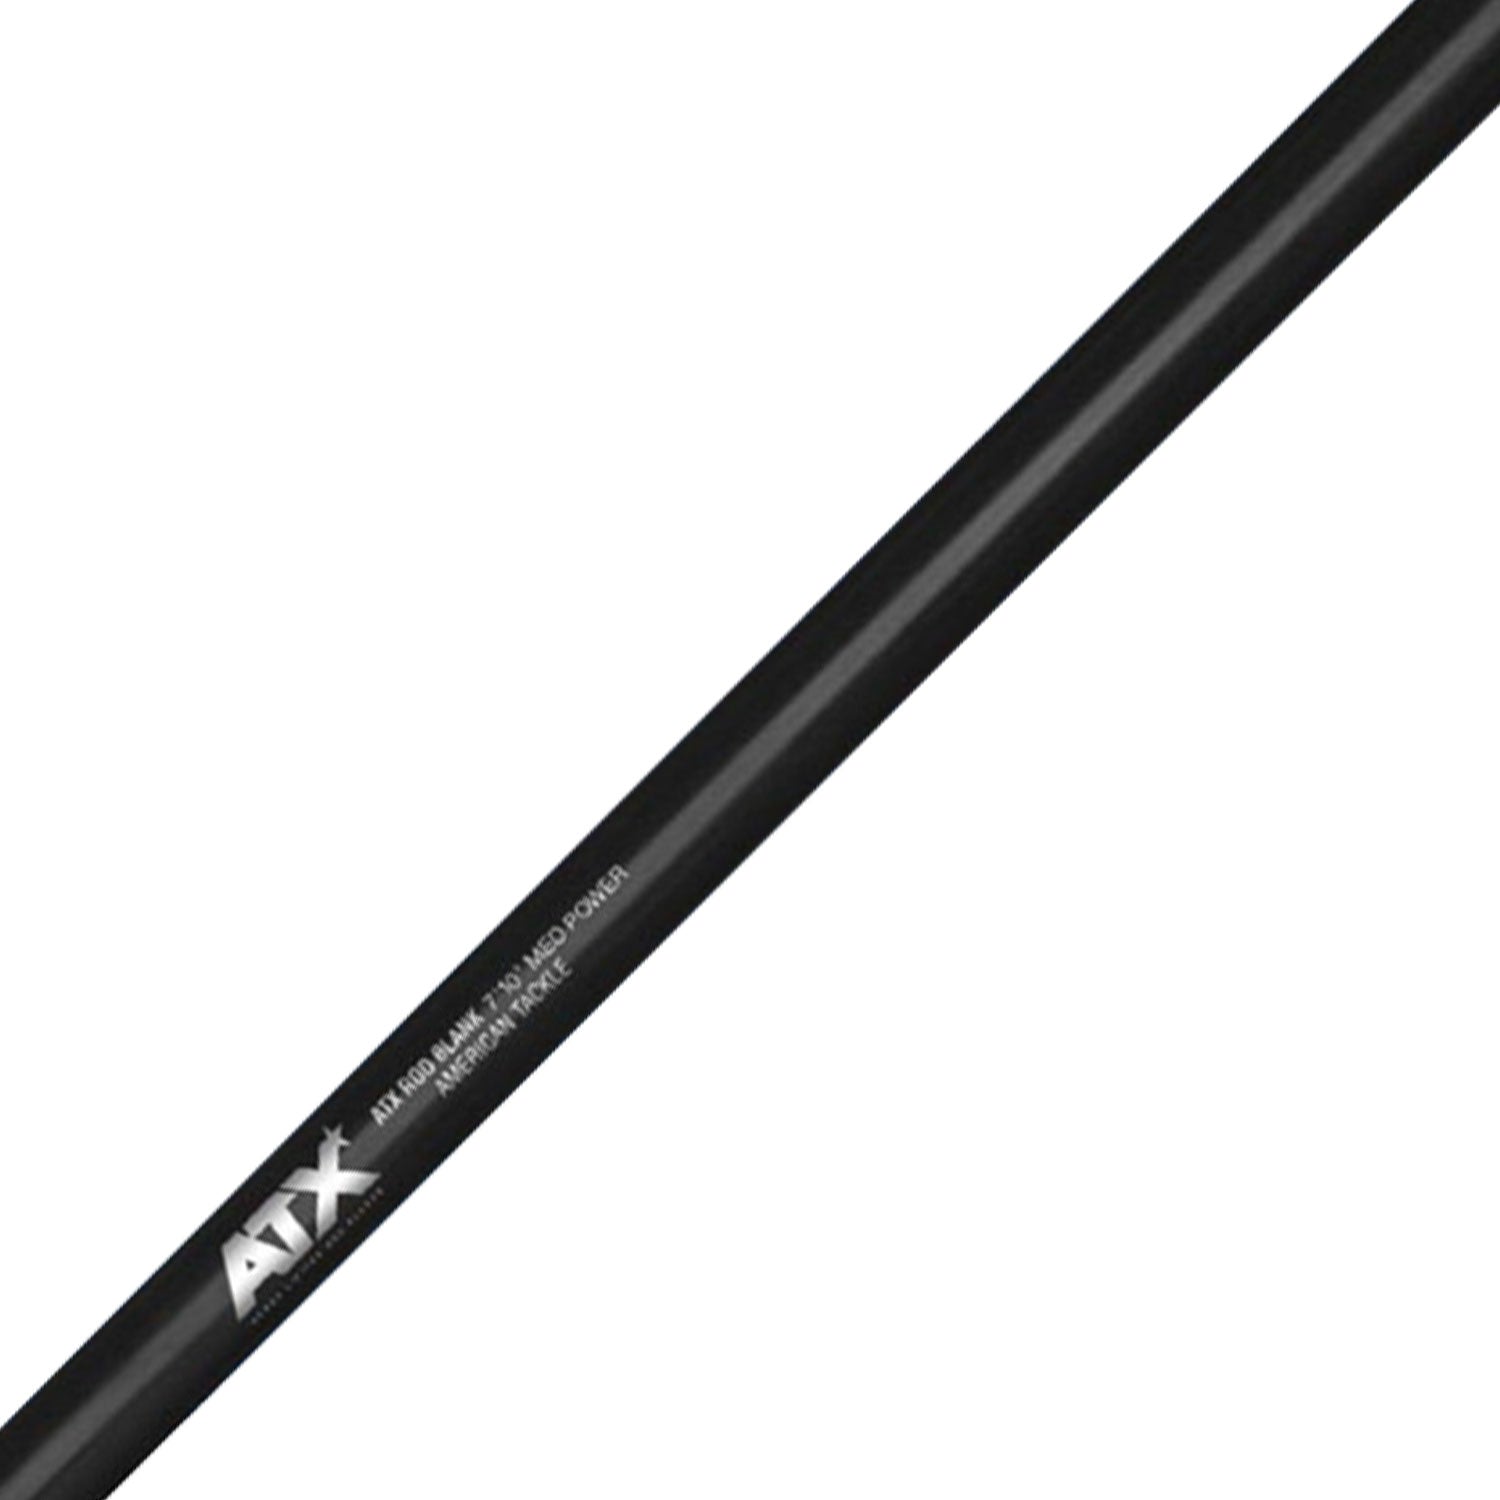 American Tackle AXC80MH Graphite Casting Rod Blank